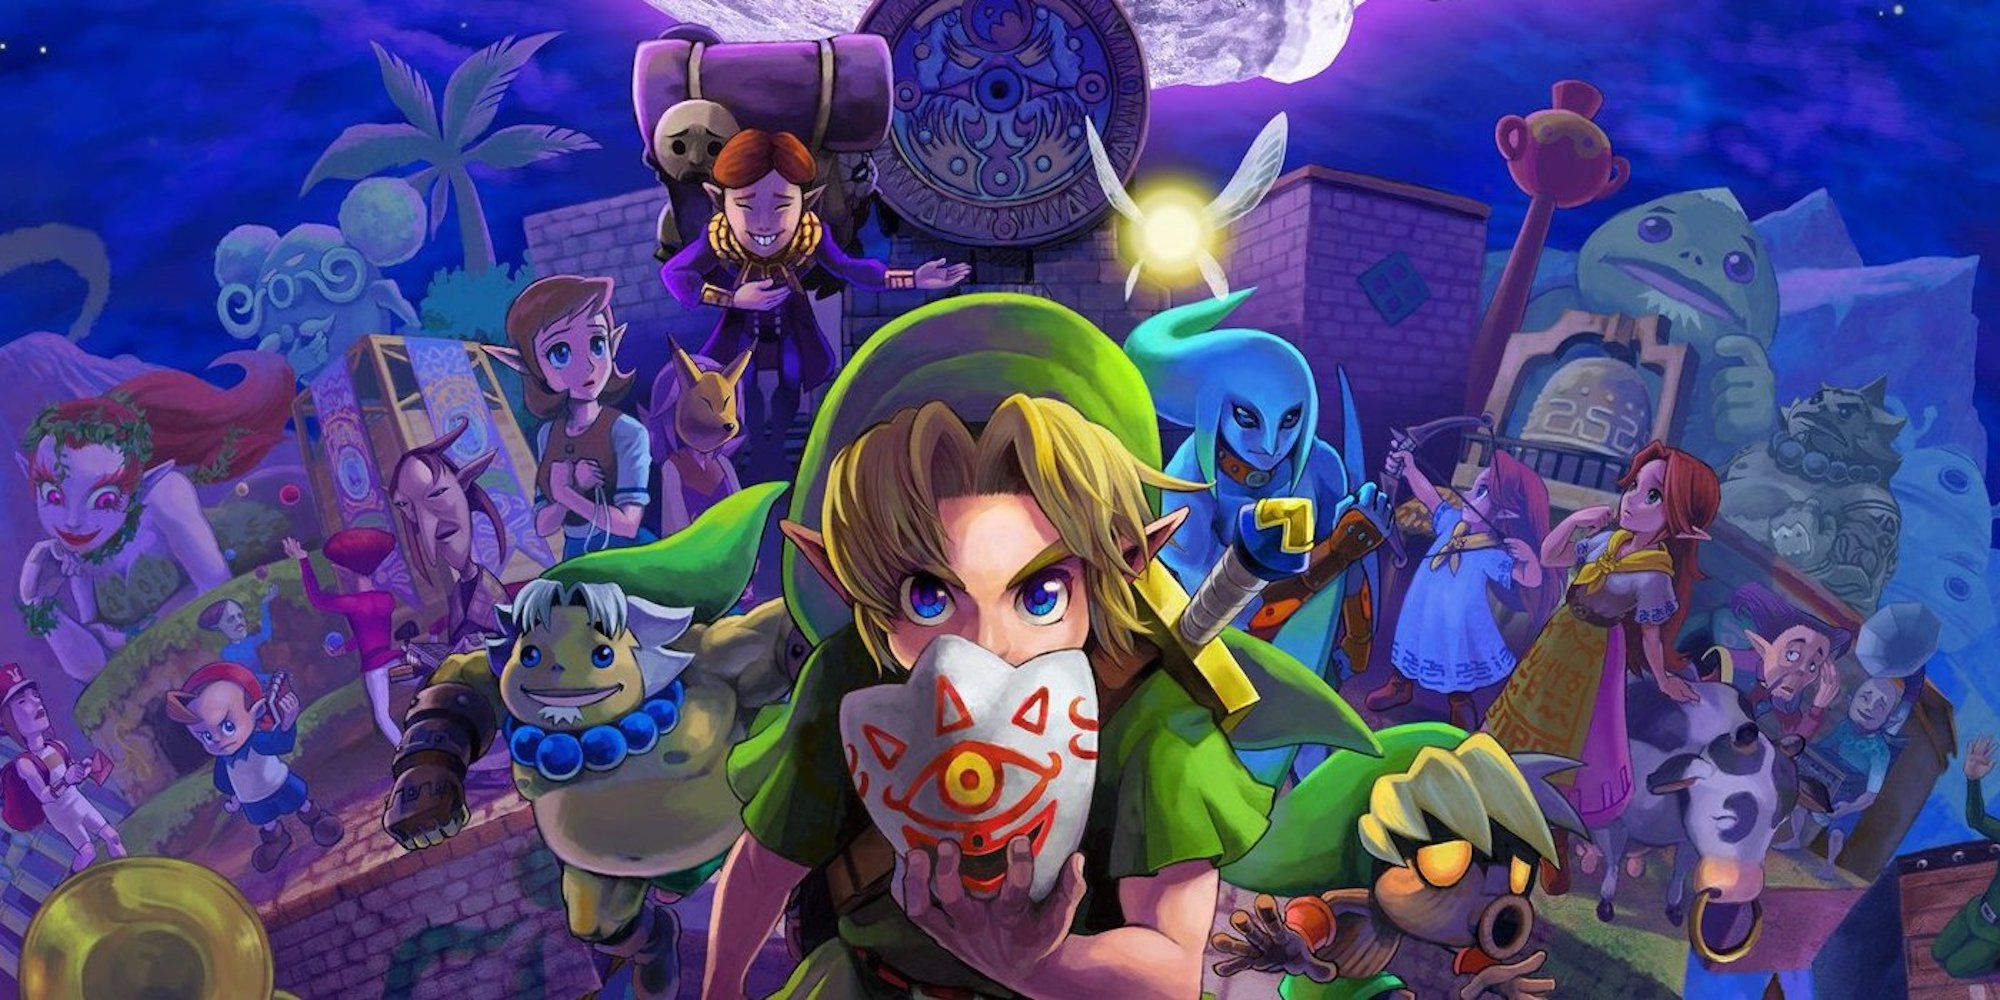 Promotional art featuring characters from The Legend of Zelda Majora's Mask